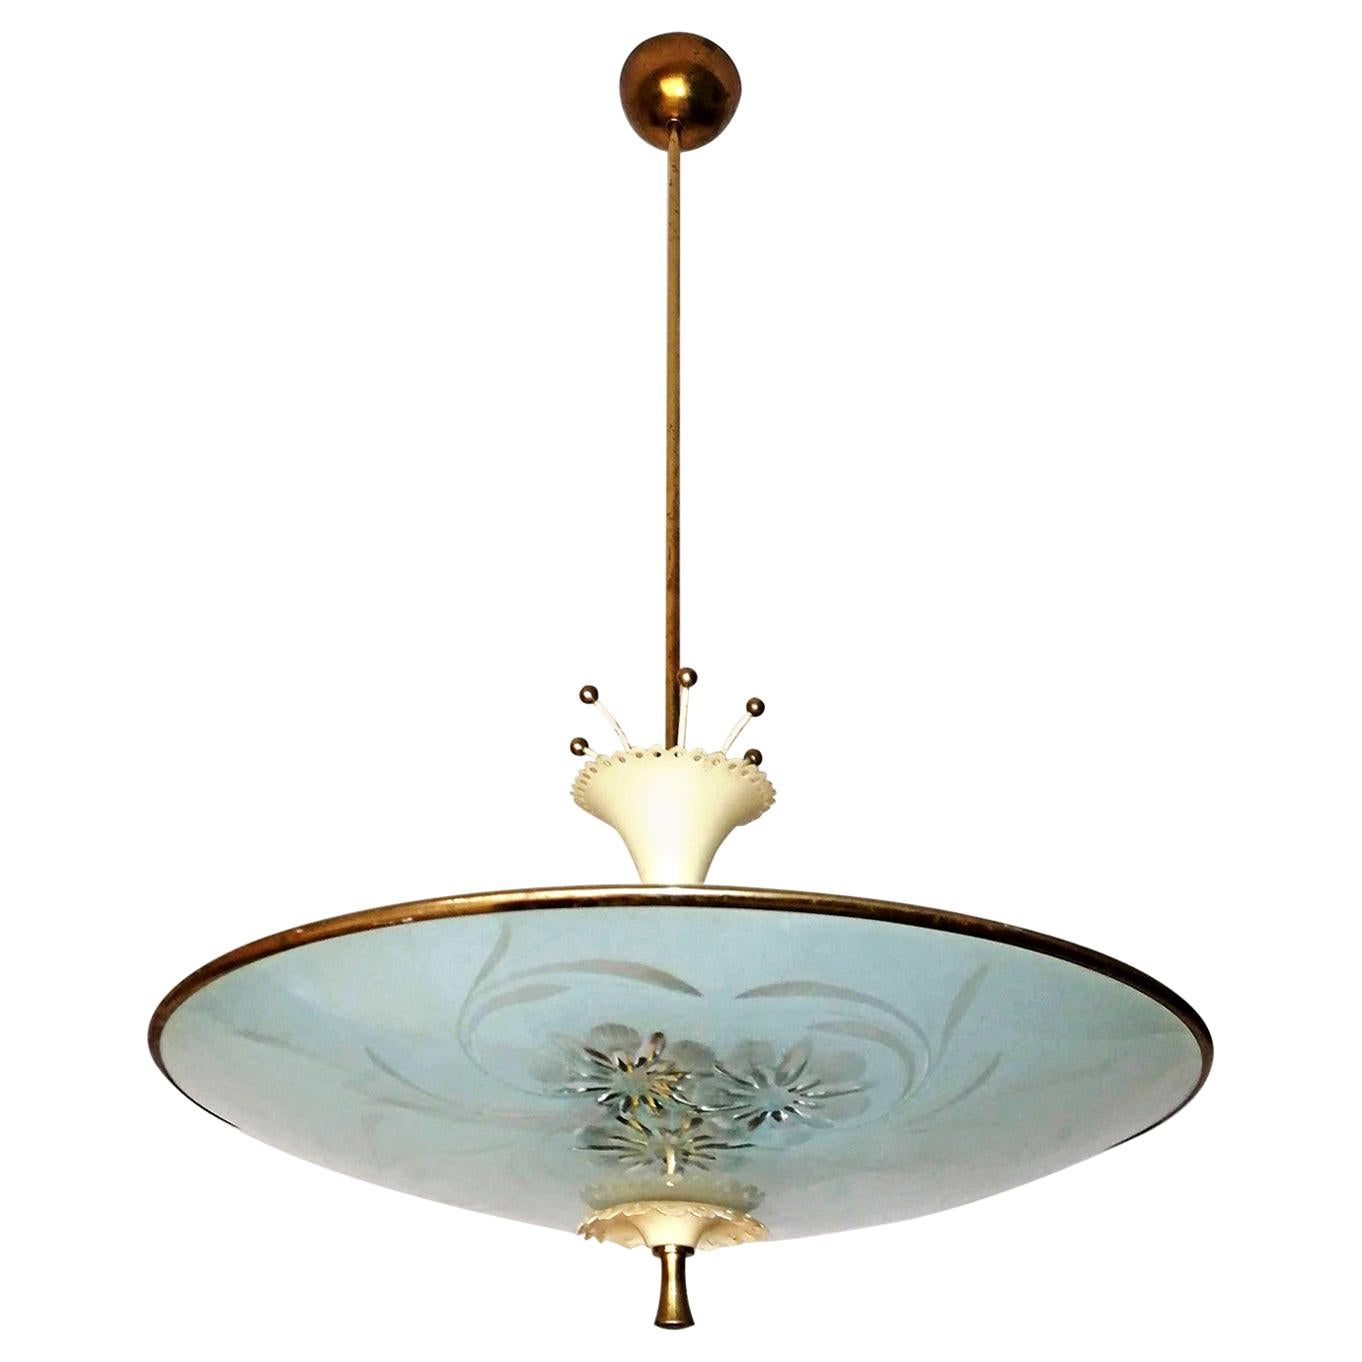 A large Mid-Century Modern vintage Suspension lamp Pietro Chiesa for Fontana Arte. Main structure in solid brass, with 2 curved discs of etched sandblasted glass and decorated representing flowers with the technique of grinding. Takes 6 standard